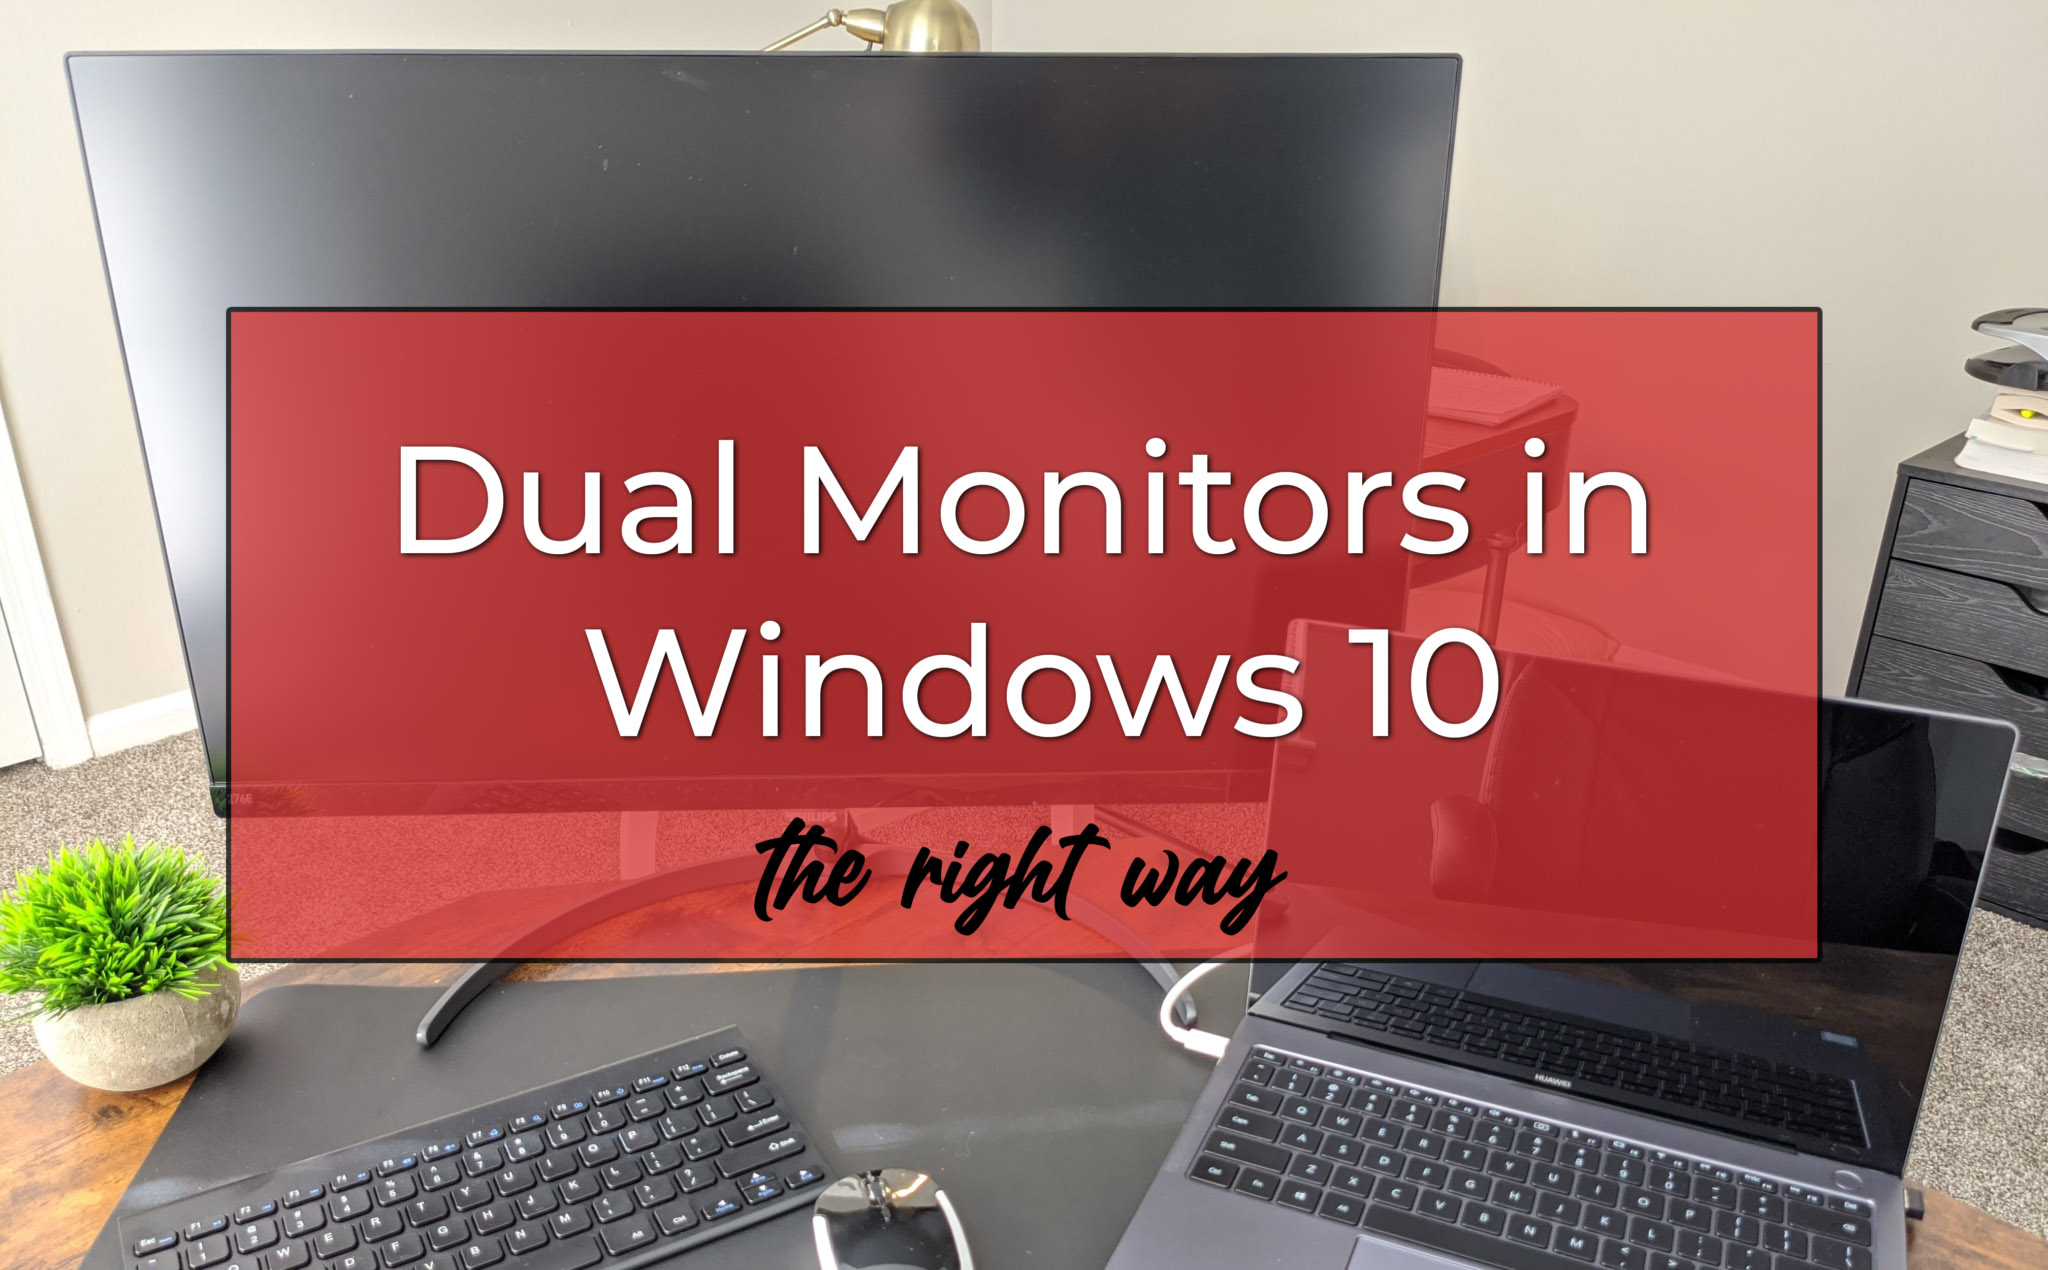 How to split screen on two monitors and create a dual monitor setup on Windows